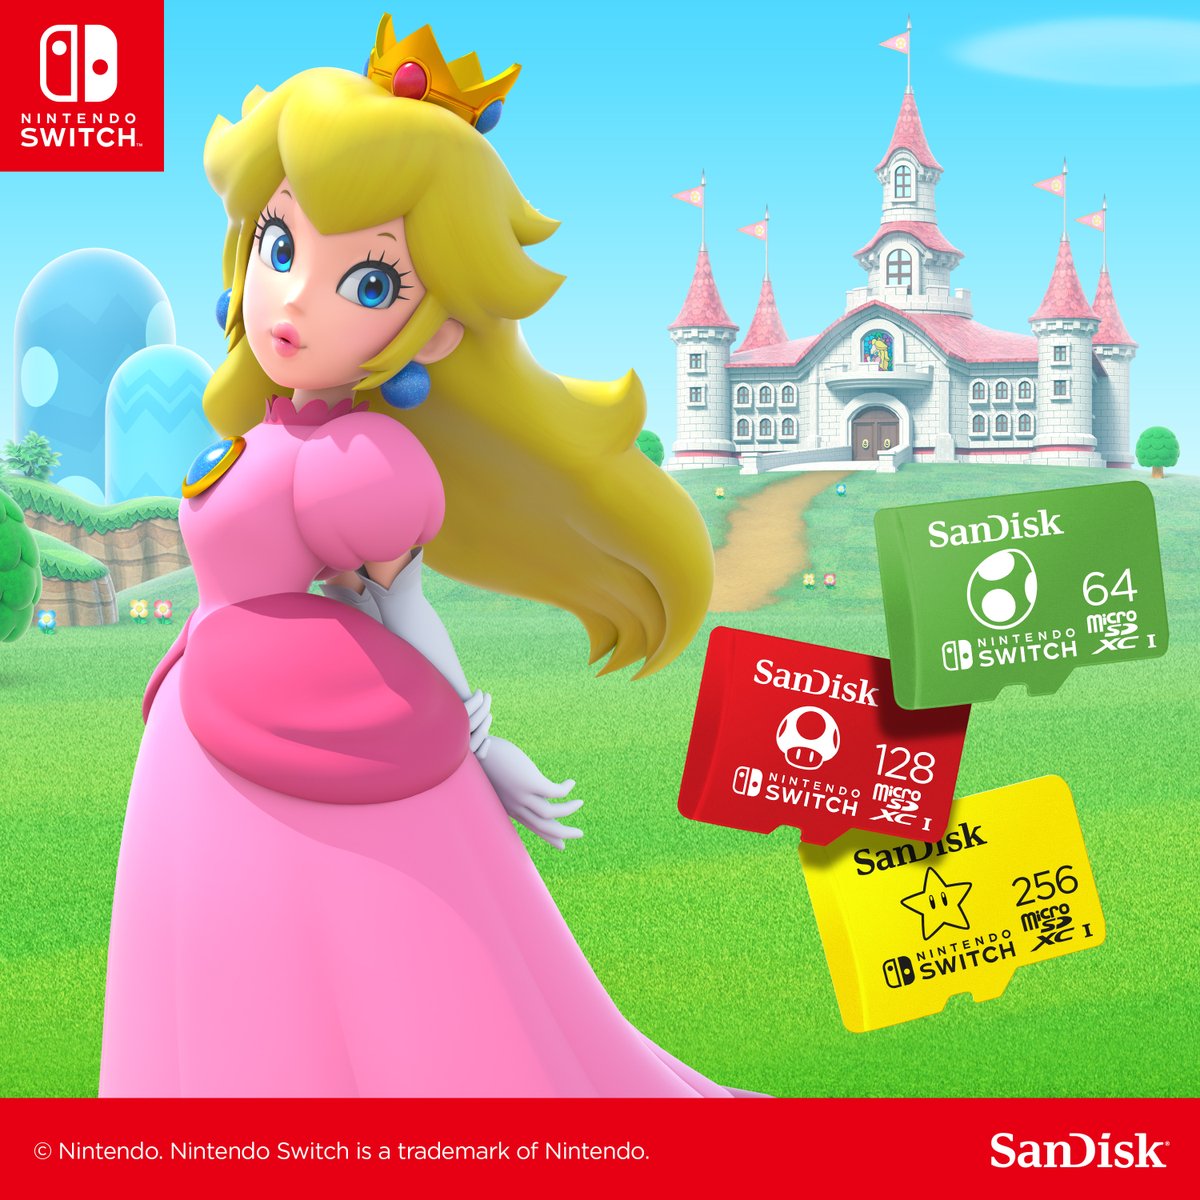 Today’s the day we celebrate the launch of the new Princess Peach Showtime! Make room with our Officially Licensed SanDisk microSD cards for the Nintendo Switch!